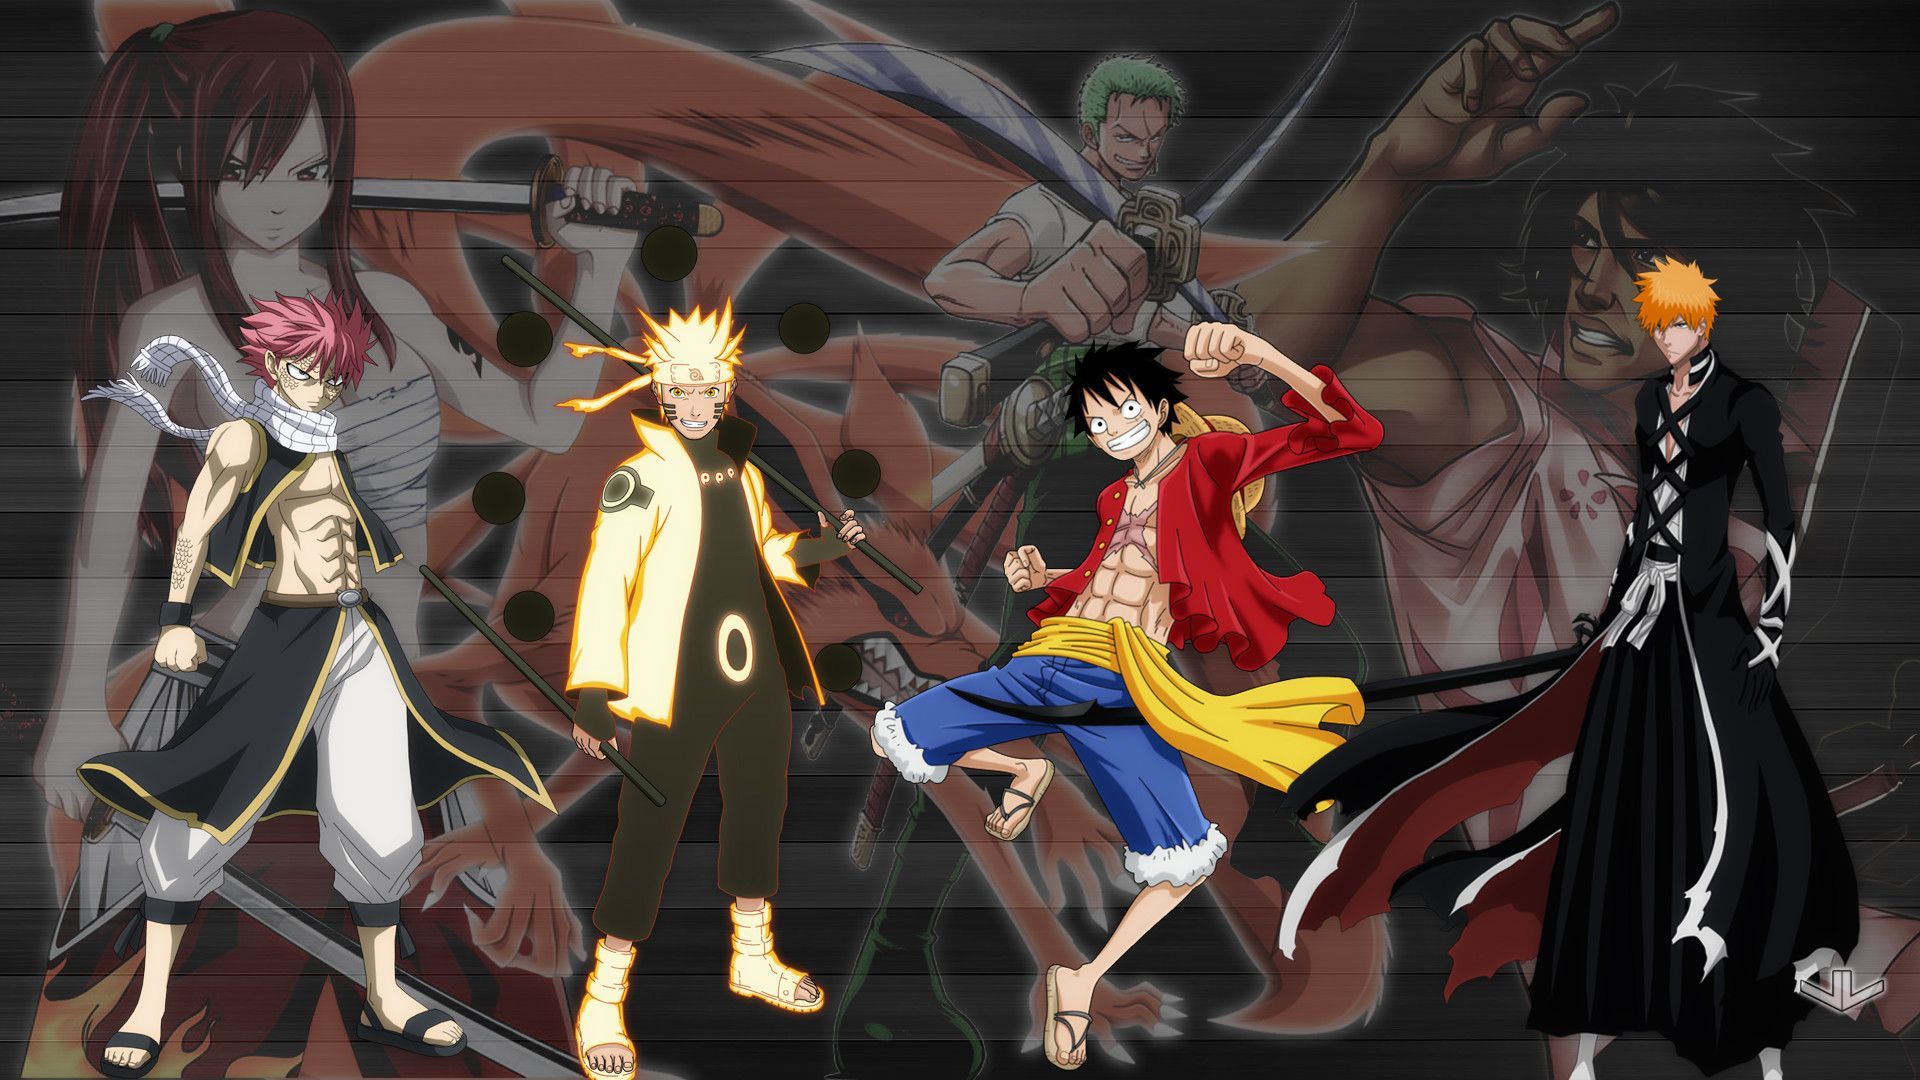 1920x1080 Anime One Piece And Naruto Wallpapers